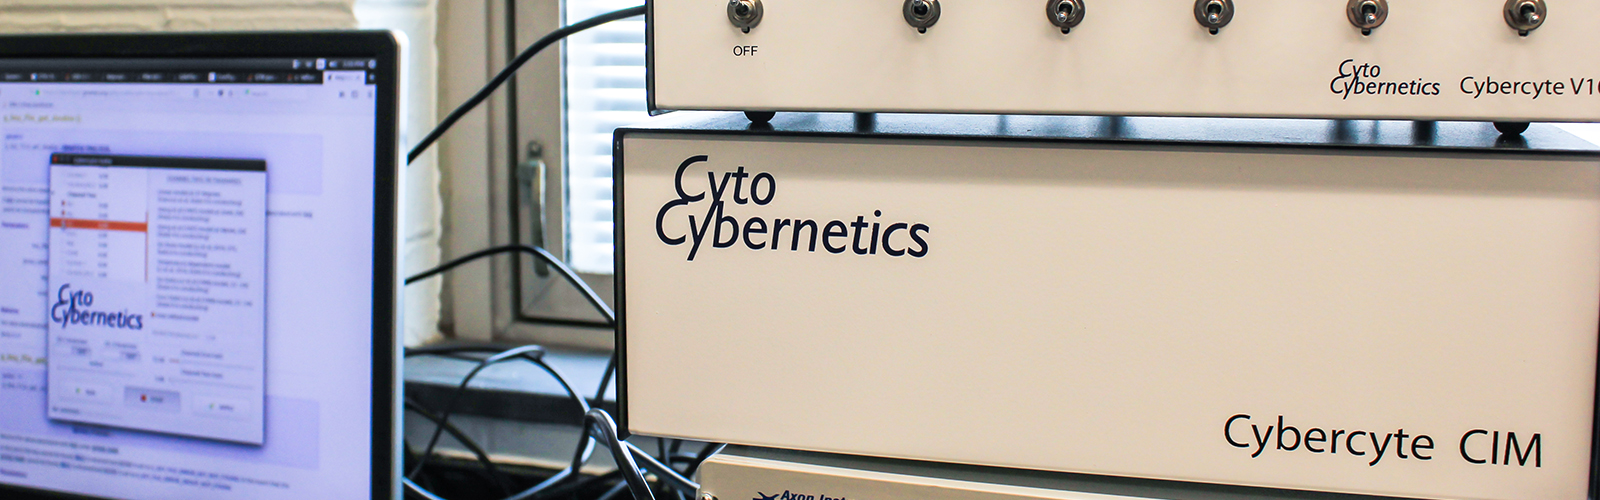 Cytocybernetics is a tech startup that provides scientific analysis grounded in electrophysiology, mathematical modeling, and engineering.